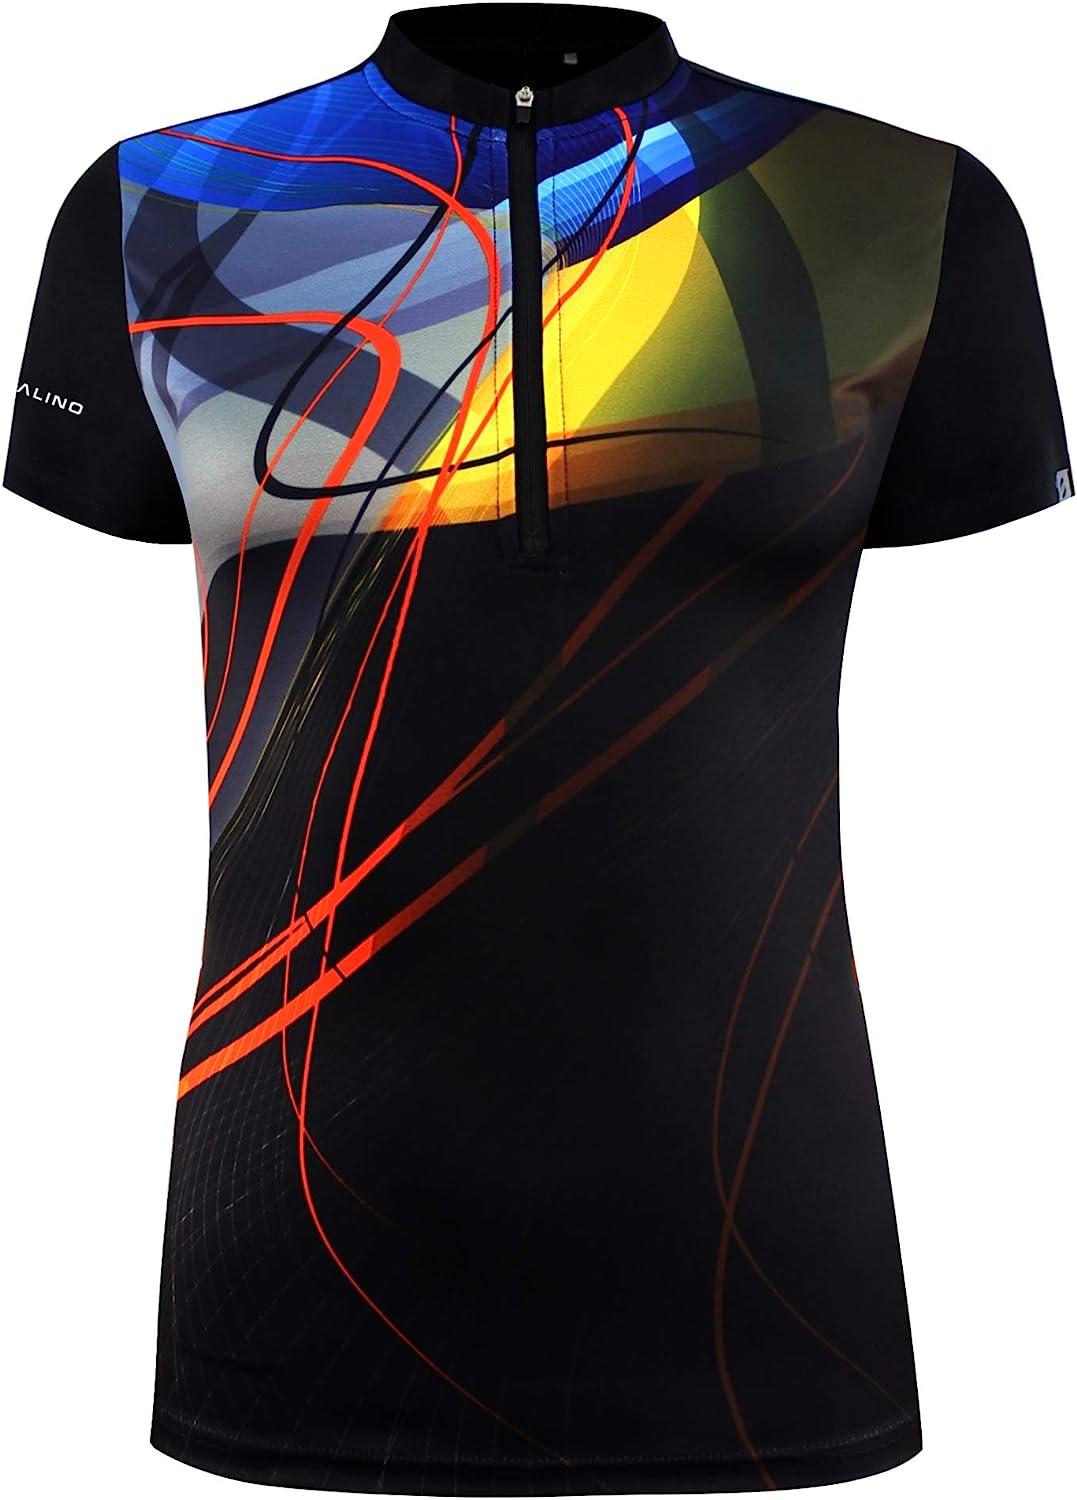 SAVALINO Men's Sublimation Bowling Jersey - Material Wicks Sweat And Dry  Quickly - Size S-5XL